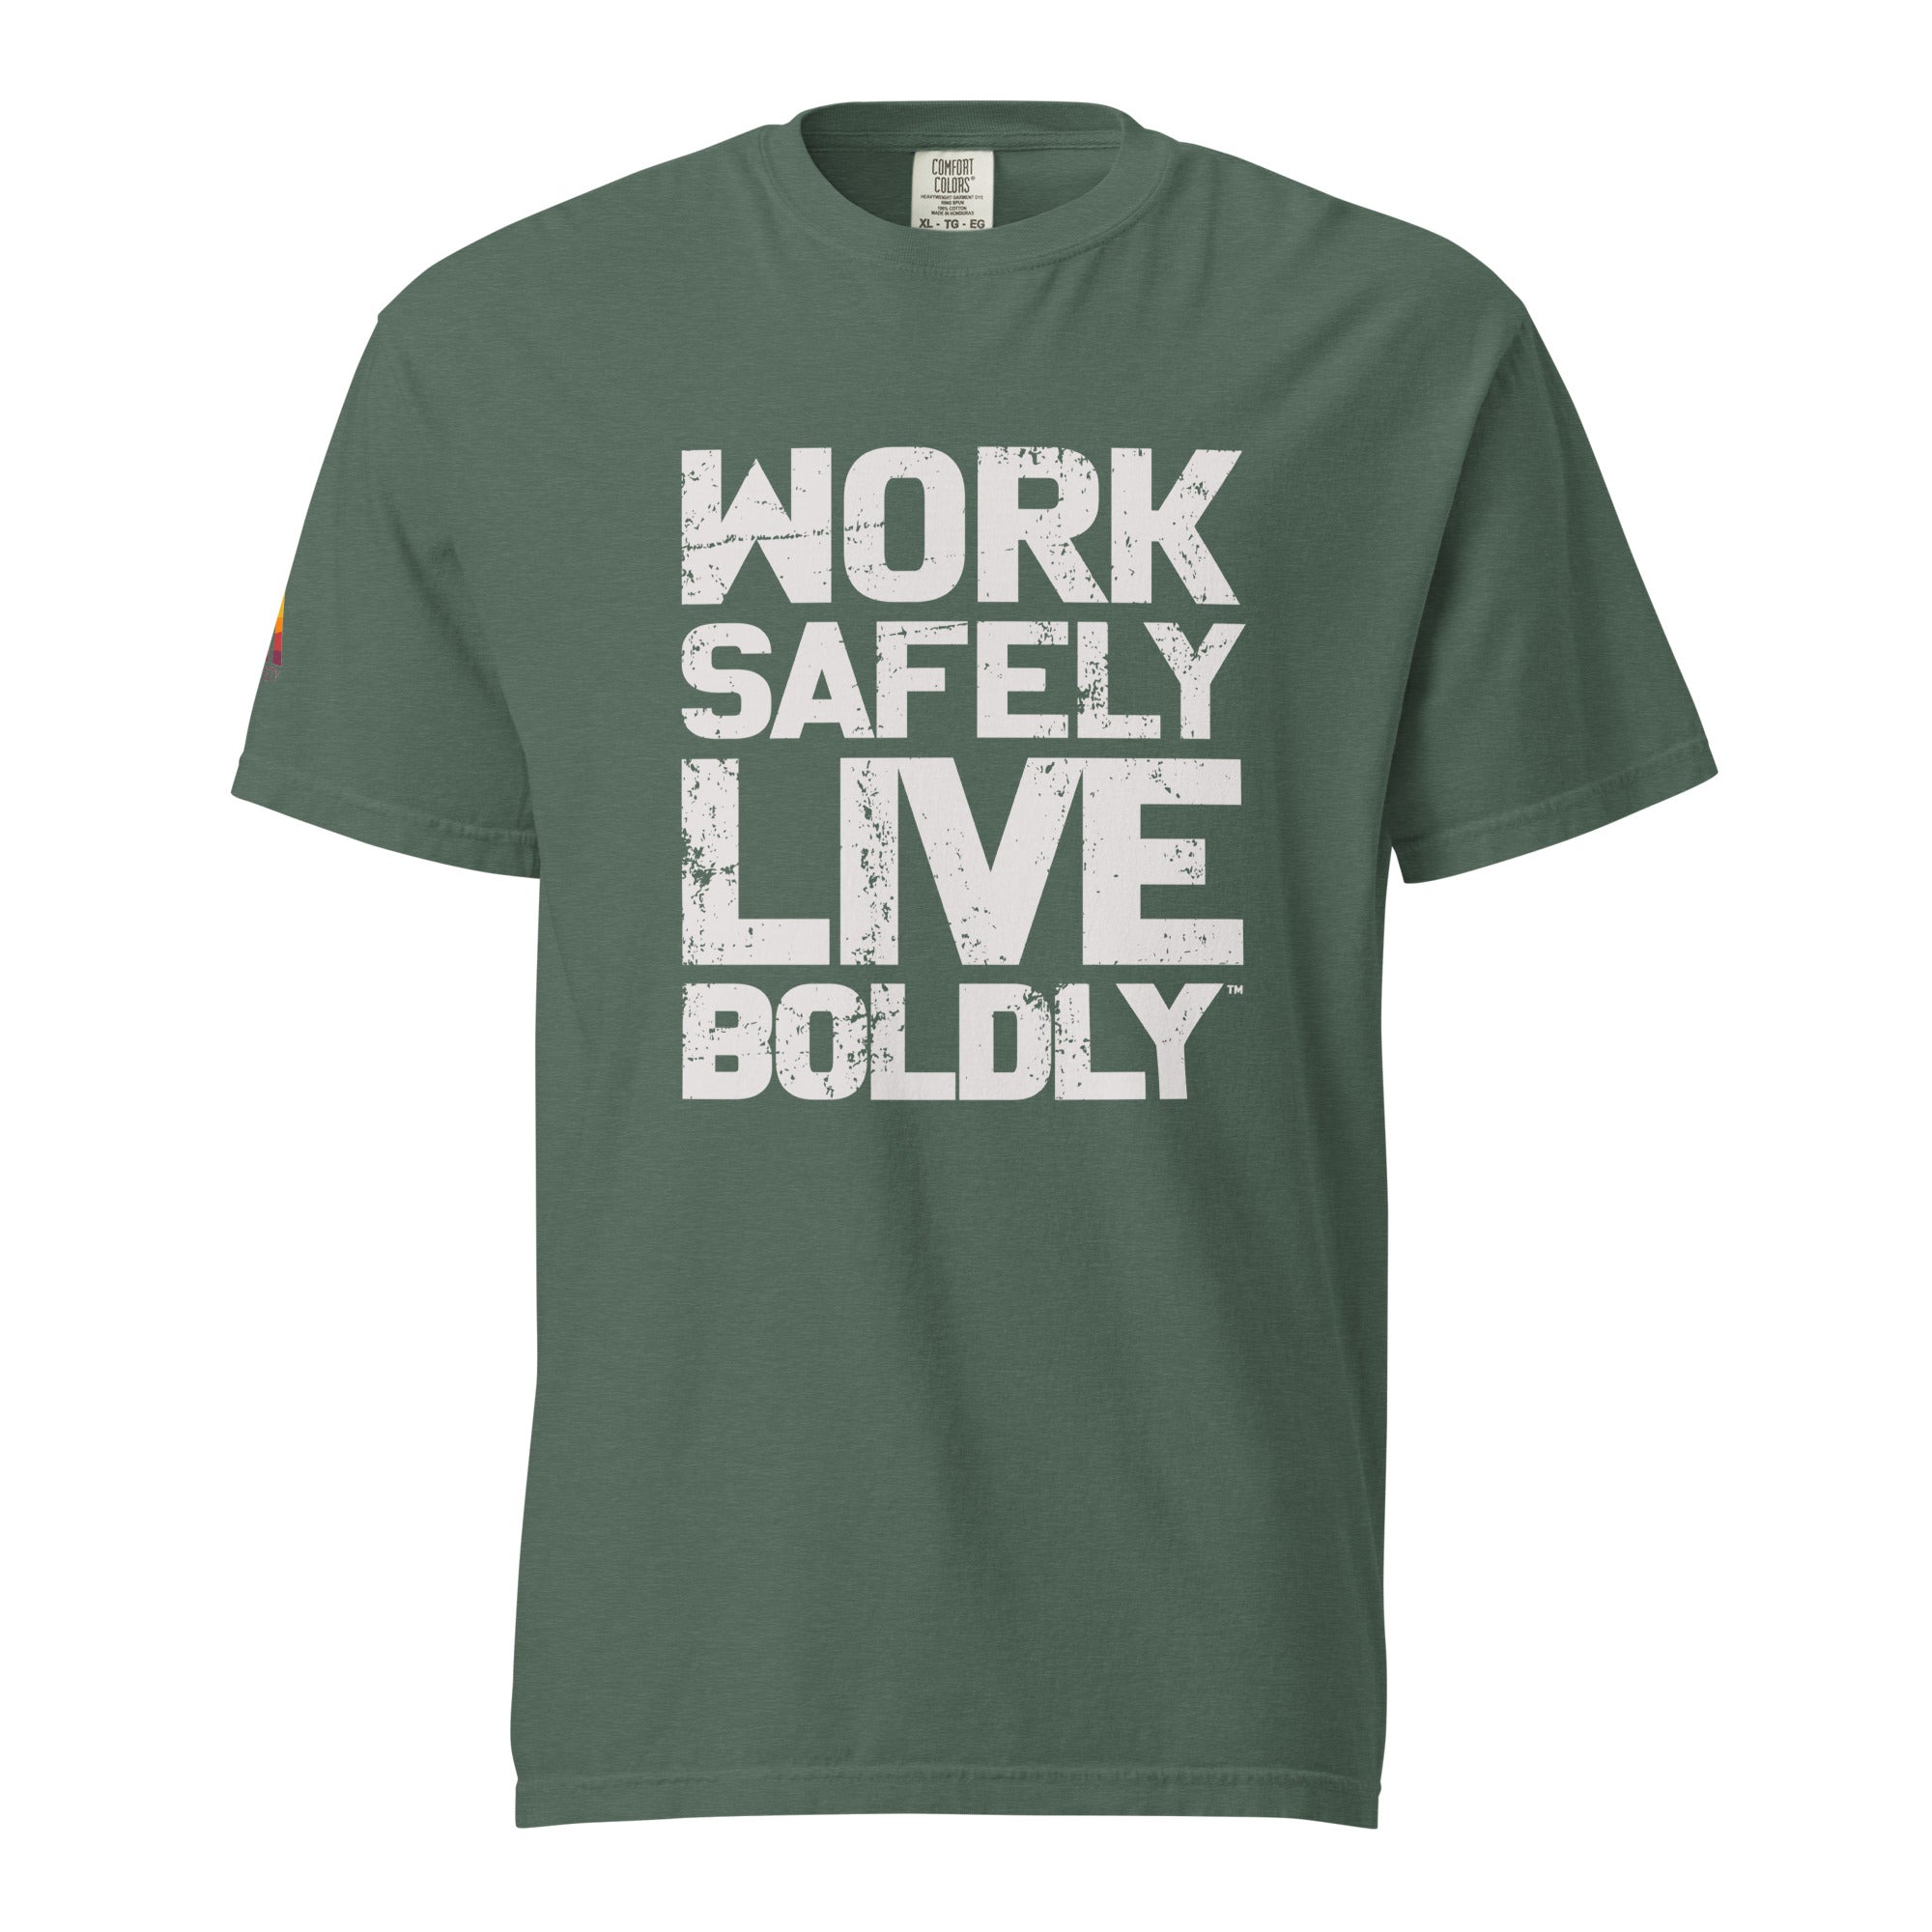 Work Safely, Live Boldly.© Tee